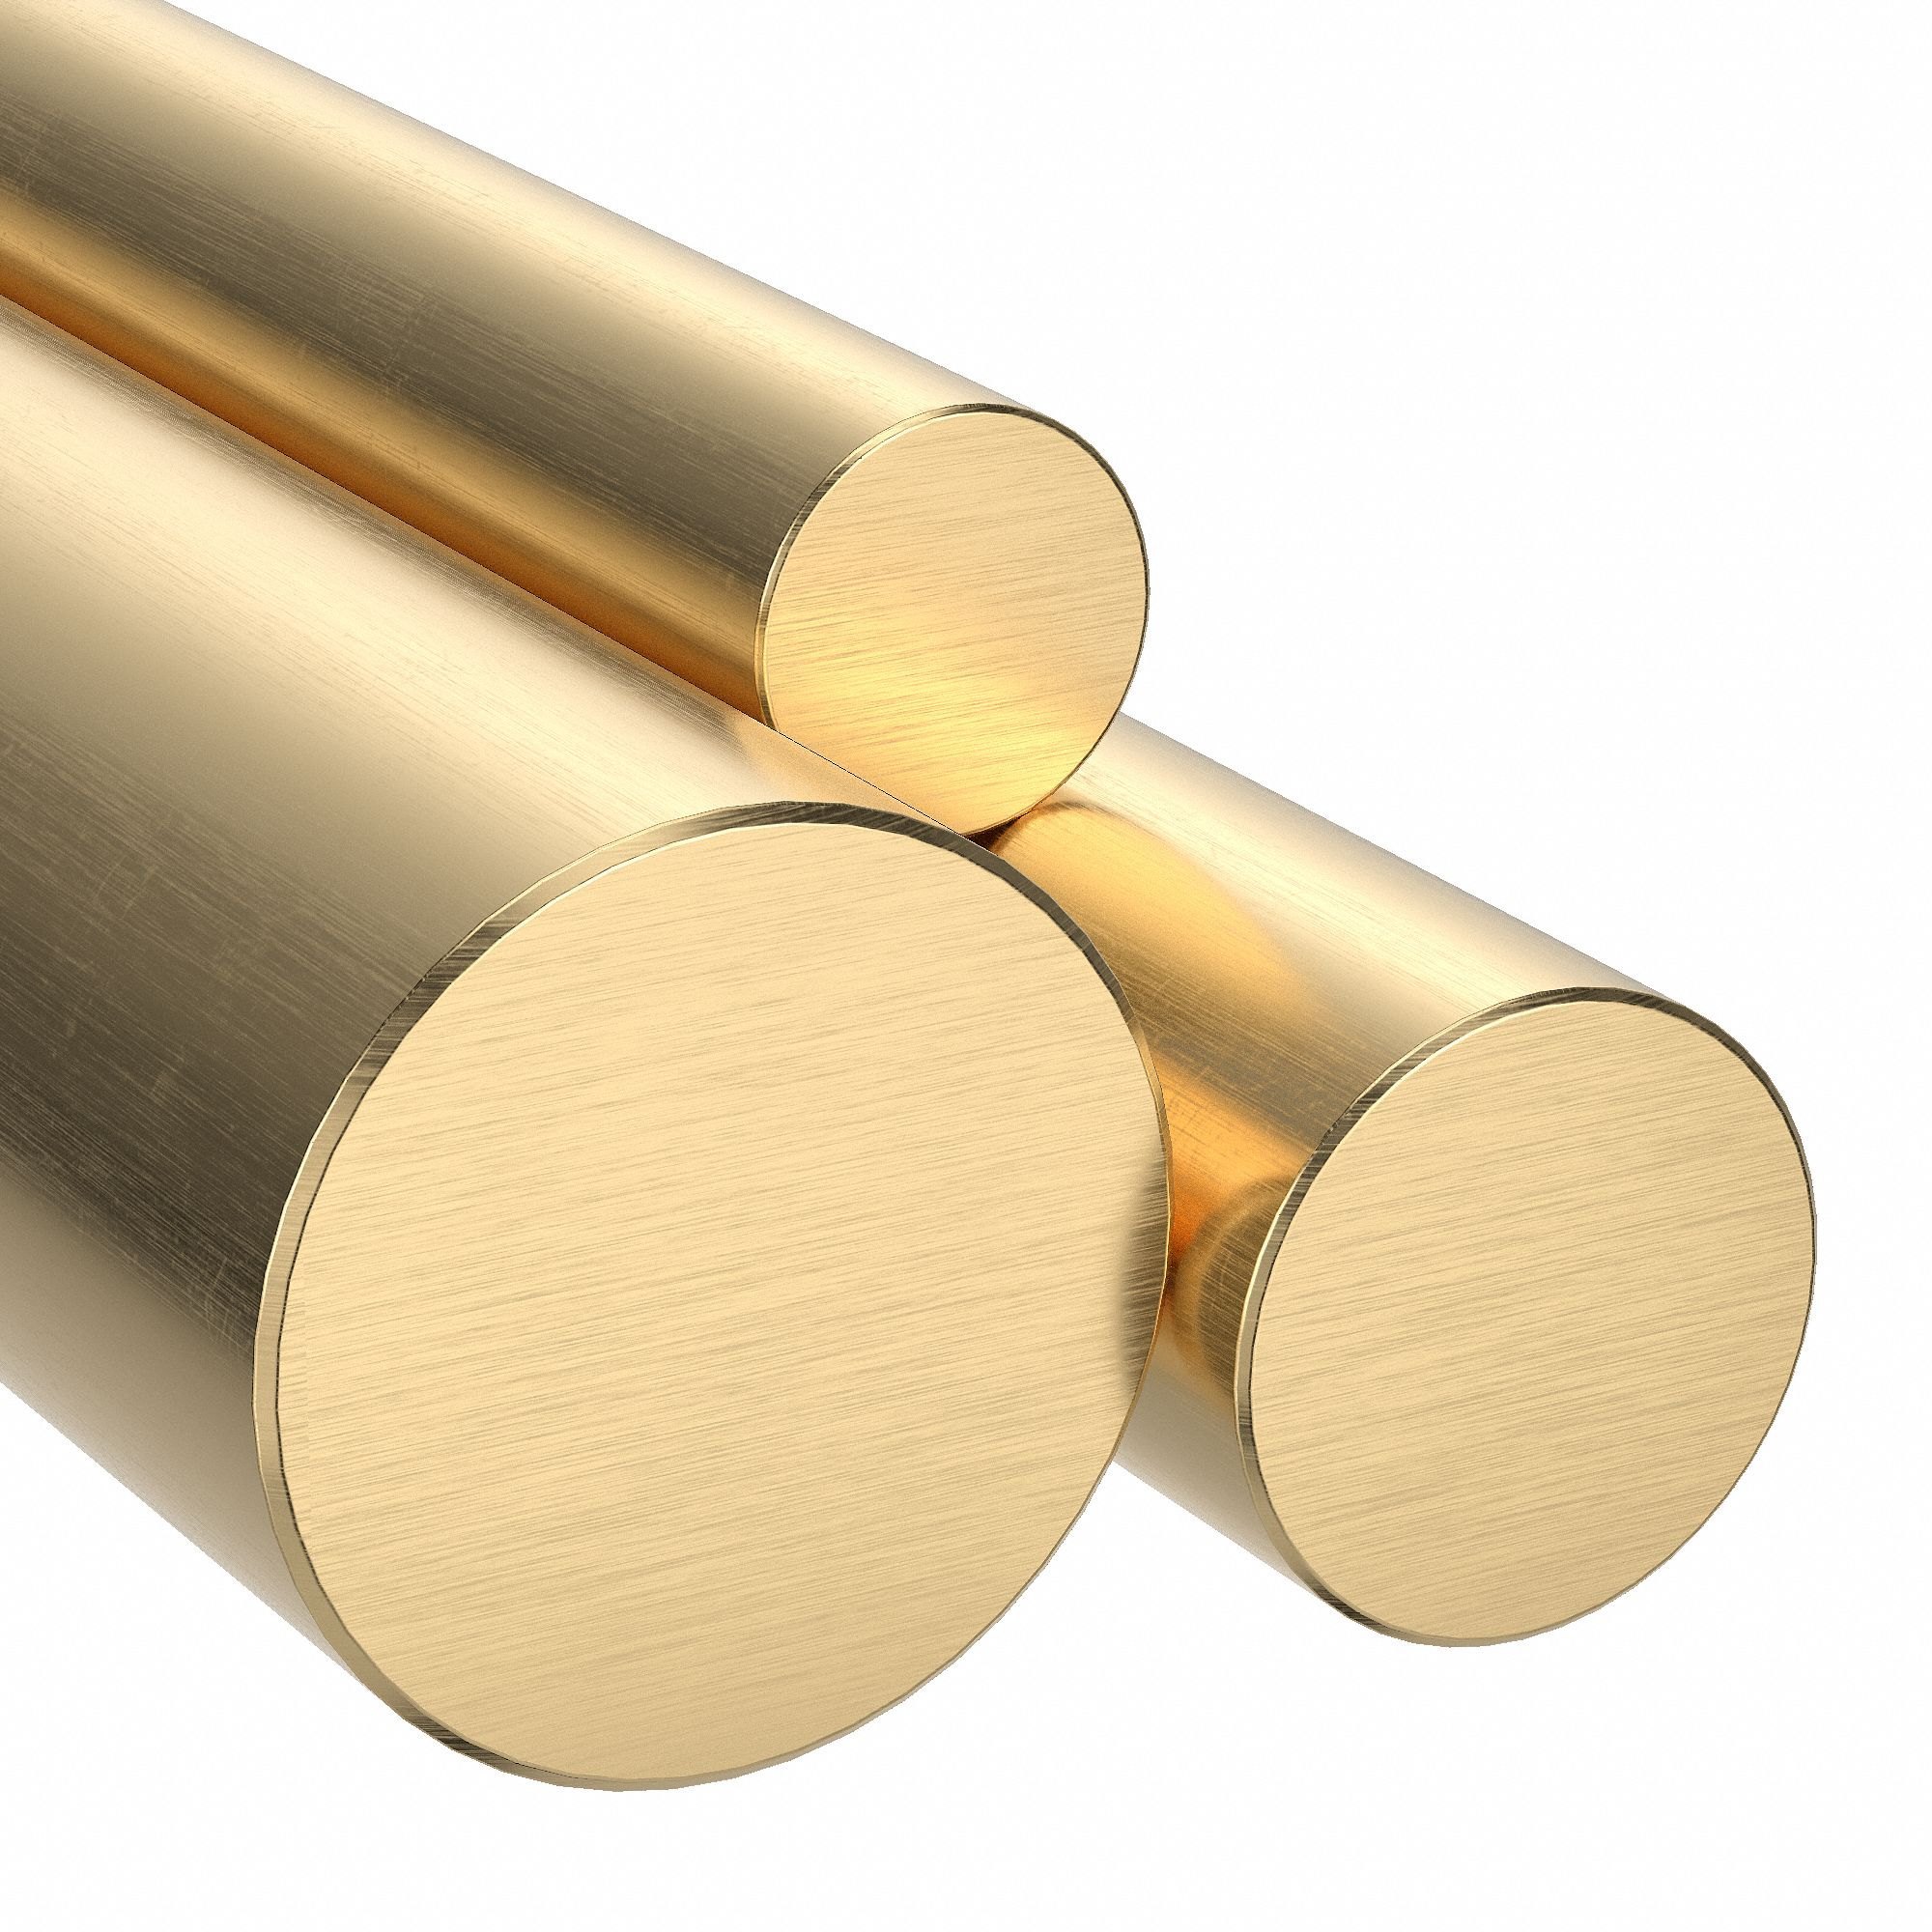 Brass Bar Wholesale Distributor from Ahmedabad - Republic Metals